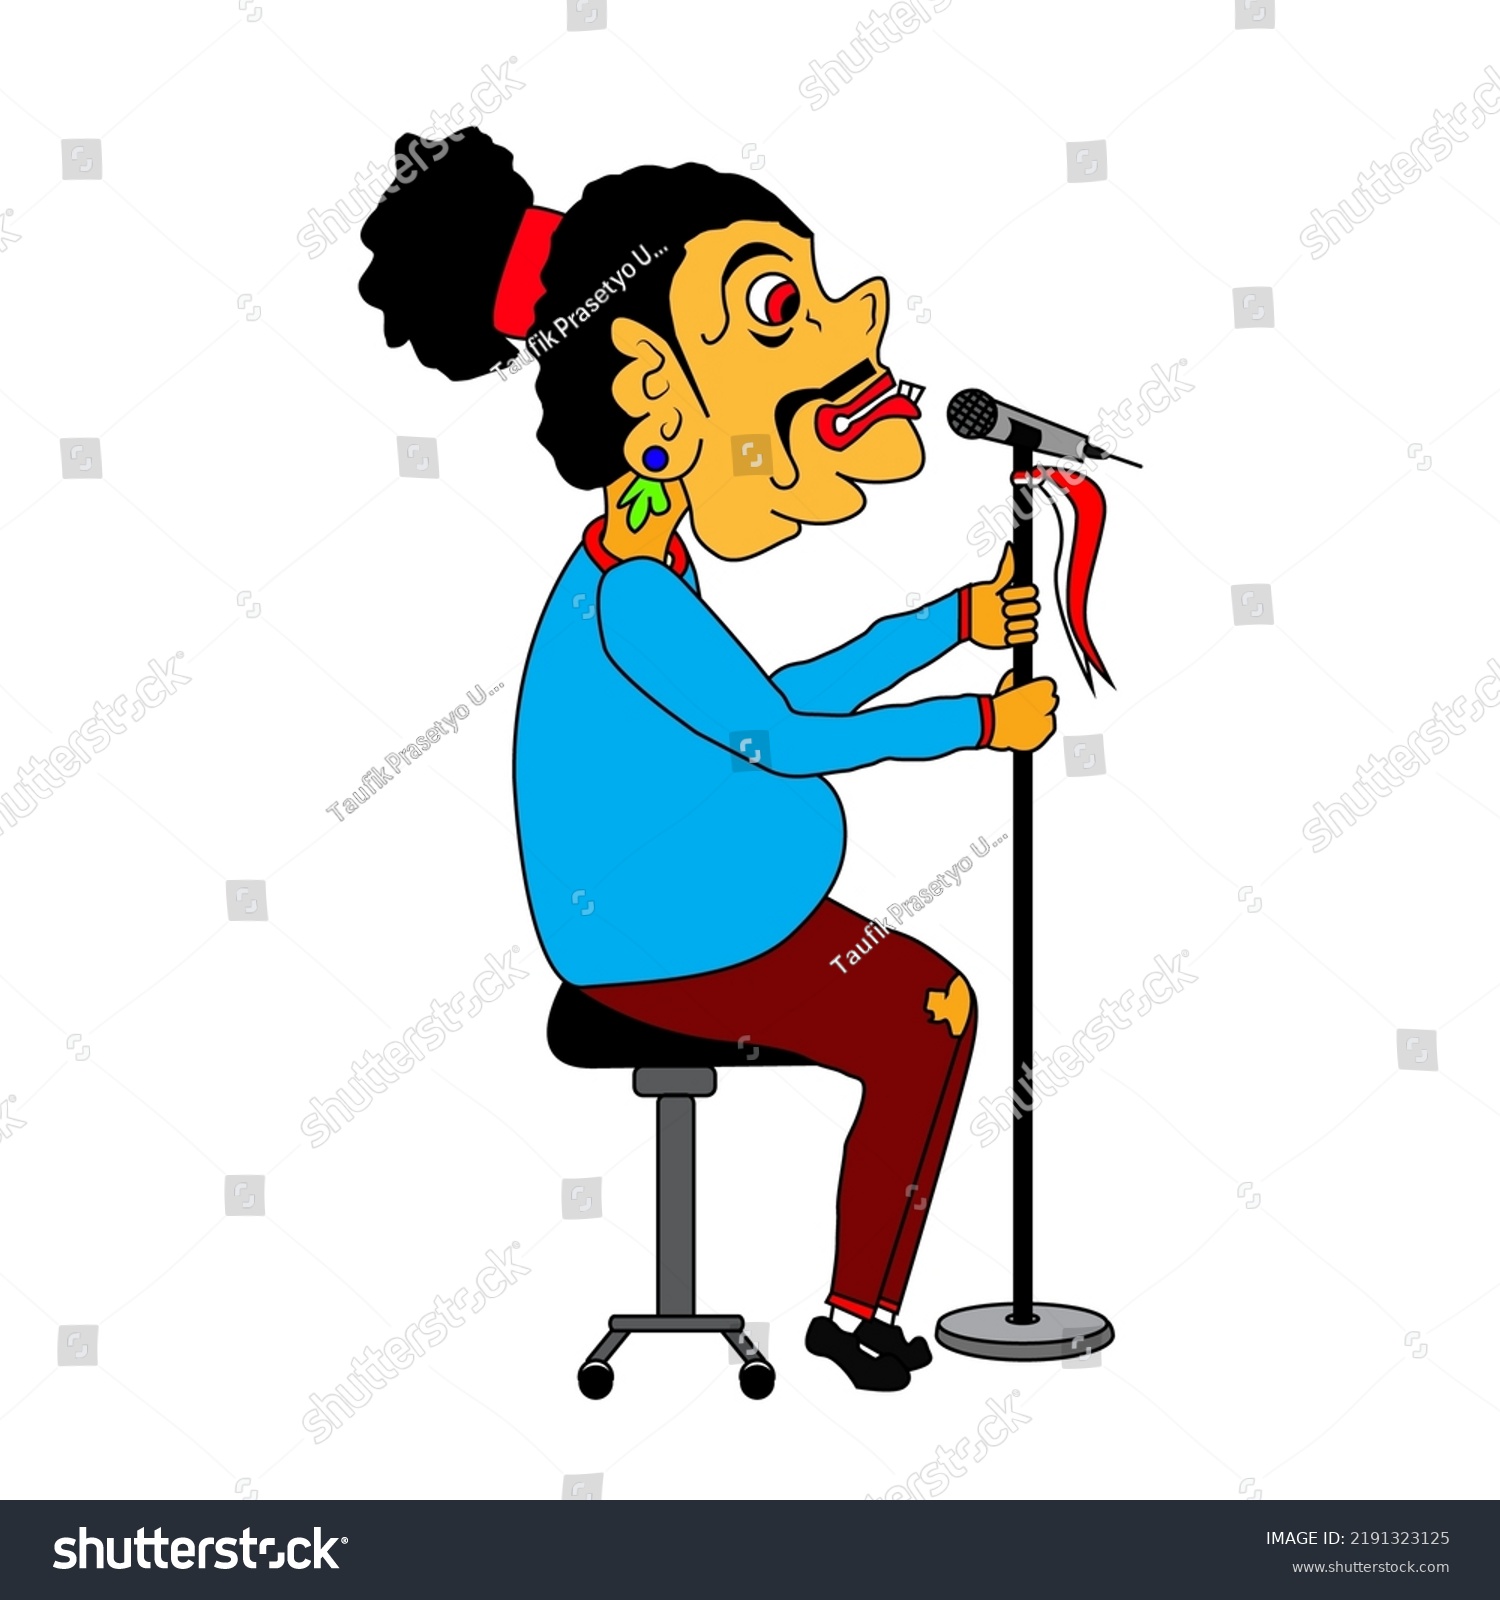 SVG of Bagong is one of the puppet characters in Indonesia, he is singing svg